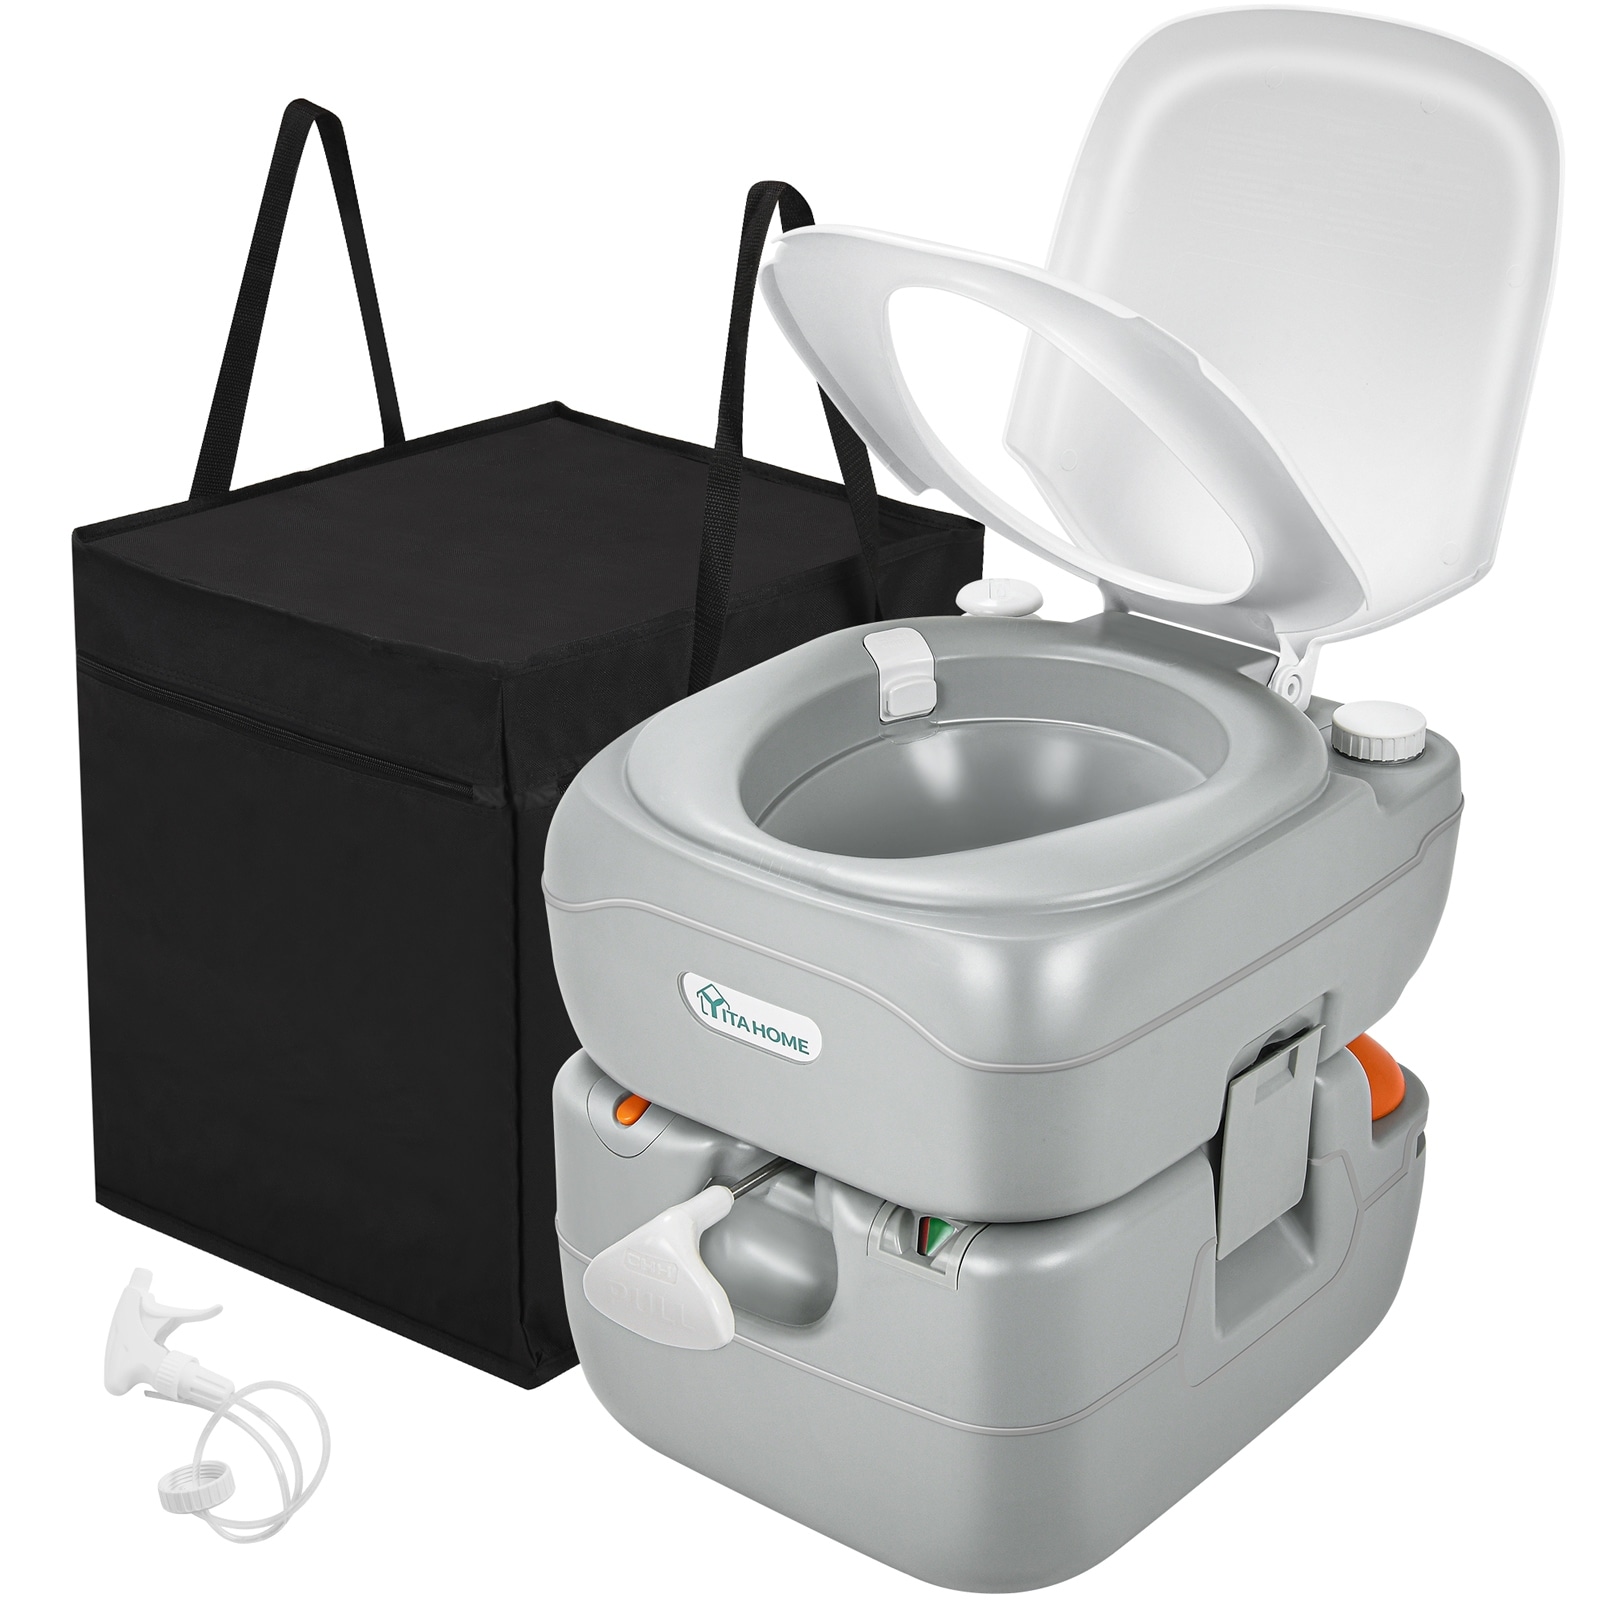 https://ak1.ostkcdn.com/images/products/is/images/direct/3f3d5be22e600e853b7a16045733733c48091b77/Portable-Toilet-Camping-Porta-Potty-5.8-Gallon-with-Carry-Bag-Hand-Sprayer-for-RV-Travel-Boat-and-Trips.jpg